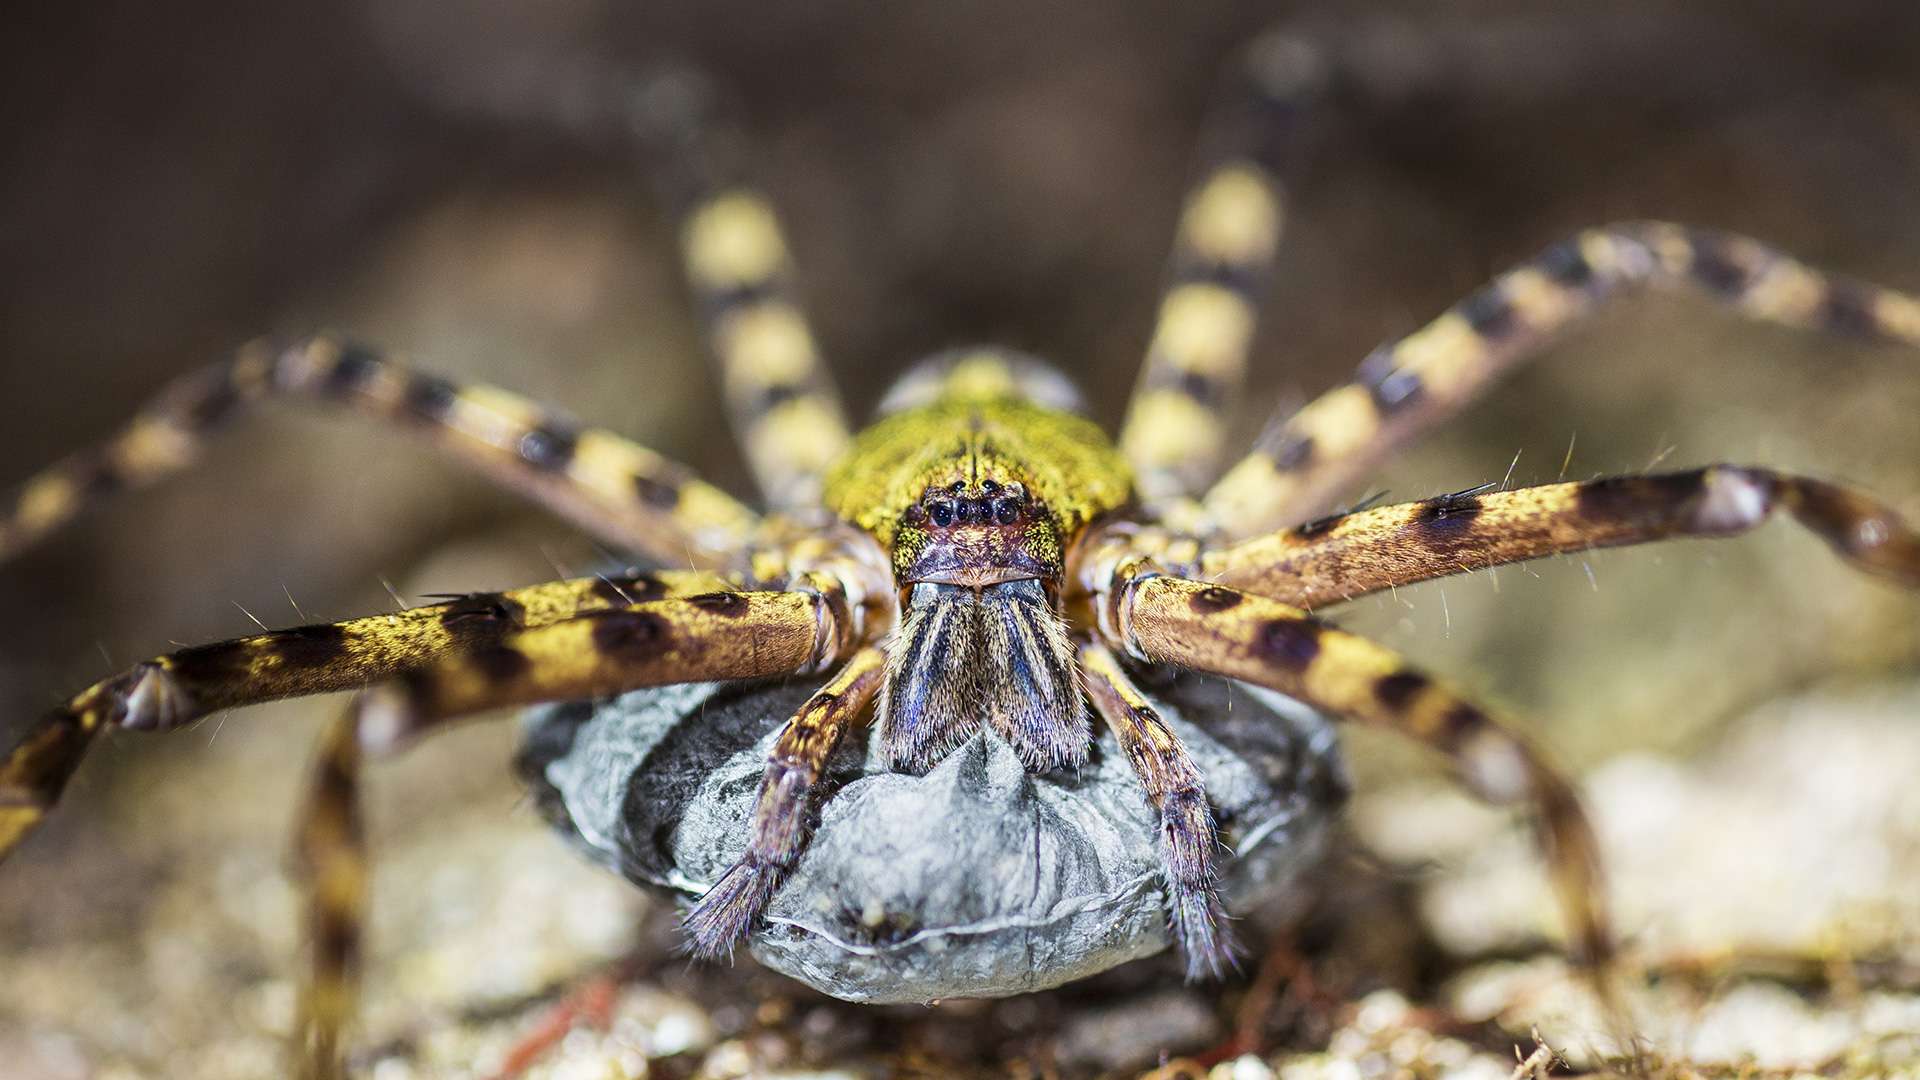 Gilles Martin's photograph of a spider from Borneo